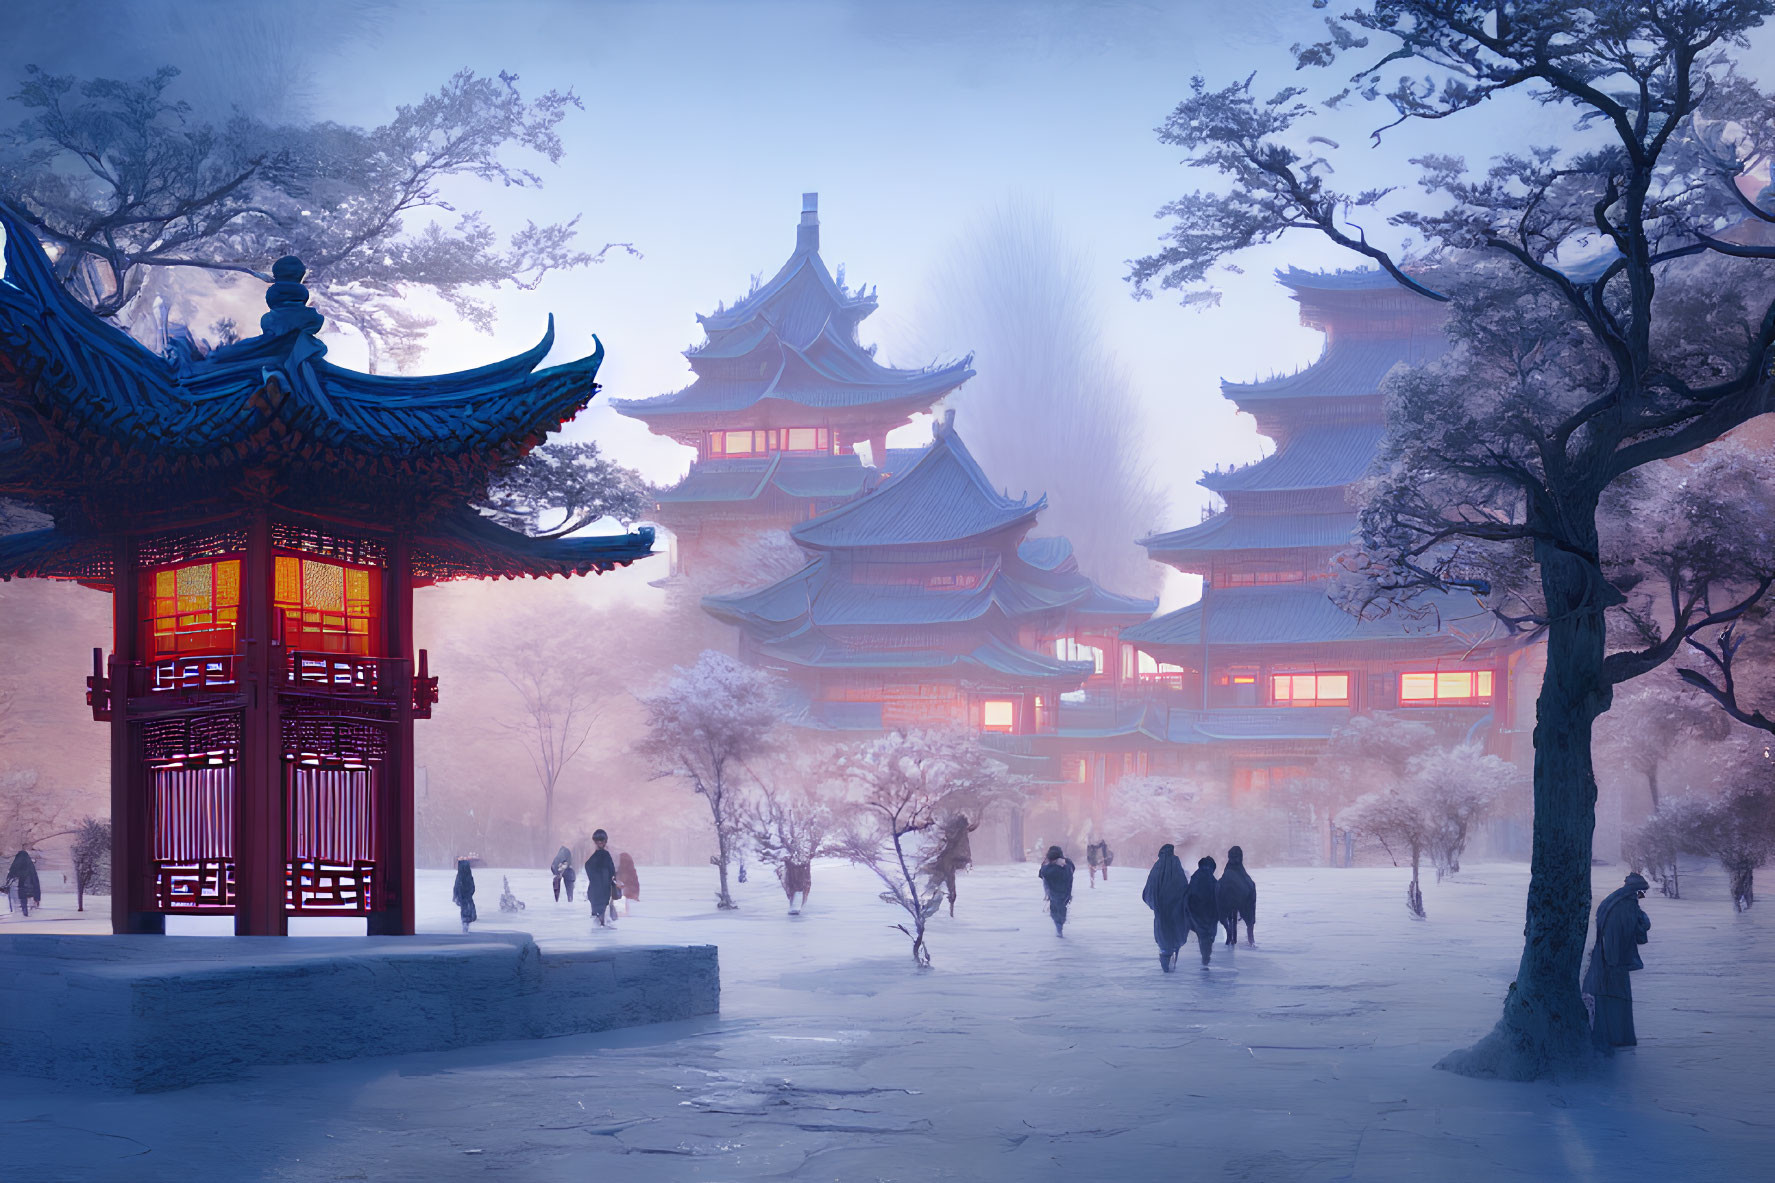 Snowy Asian temple complex with pagodas, lantern, and misty ambiance